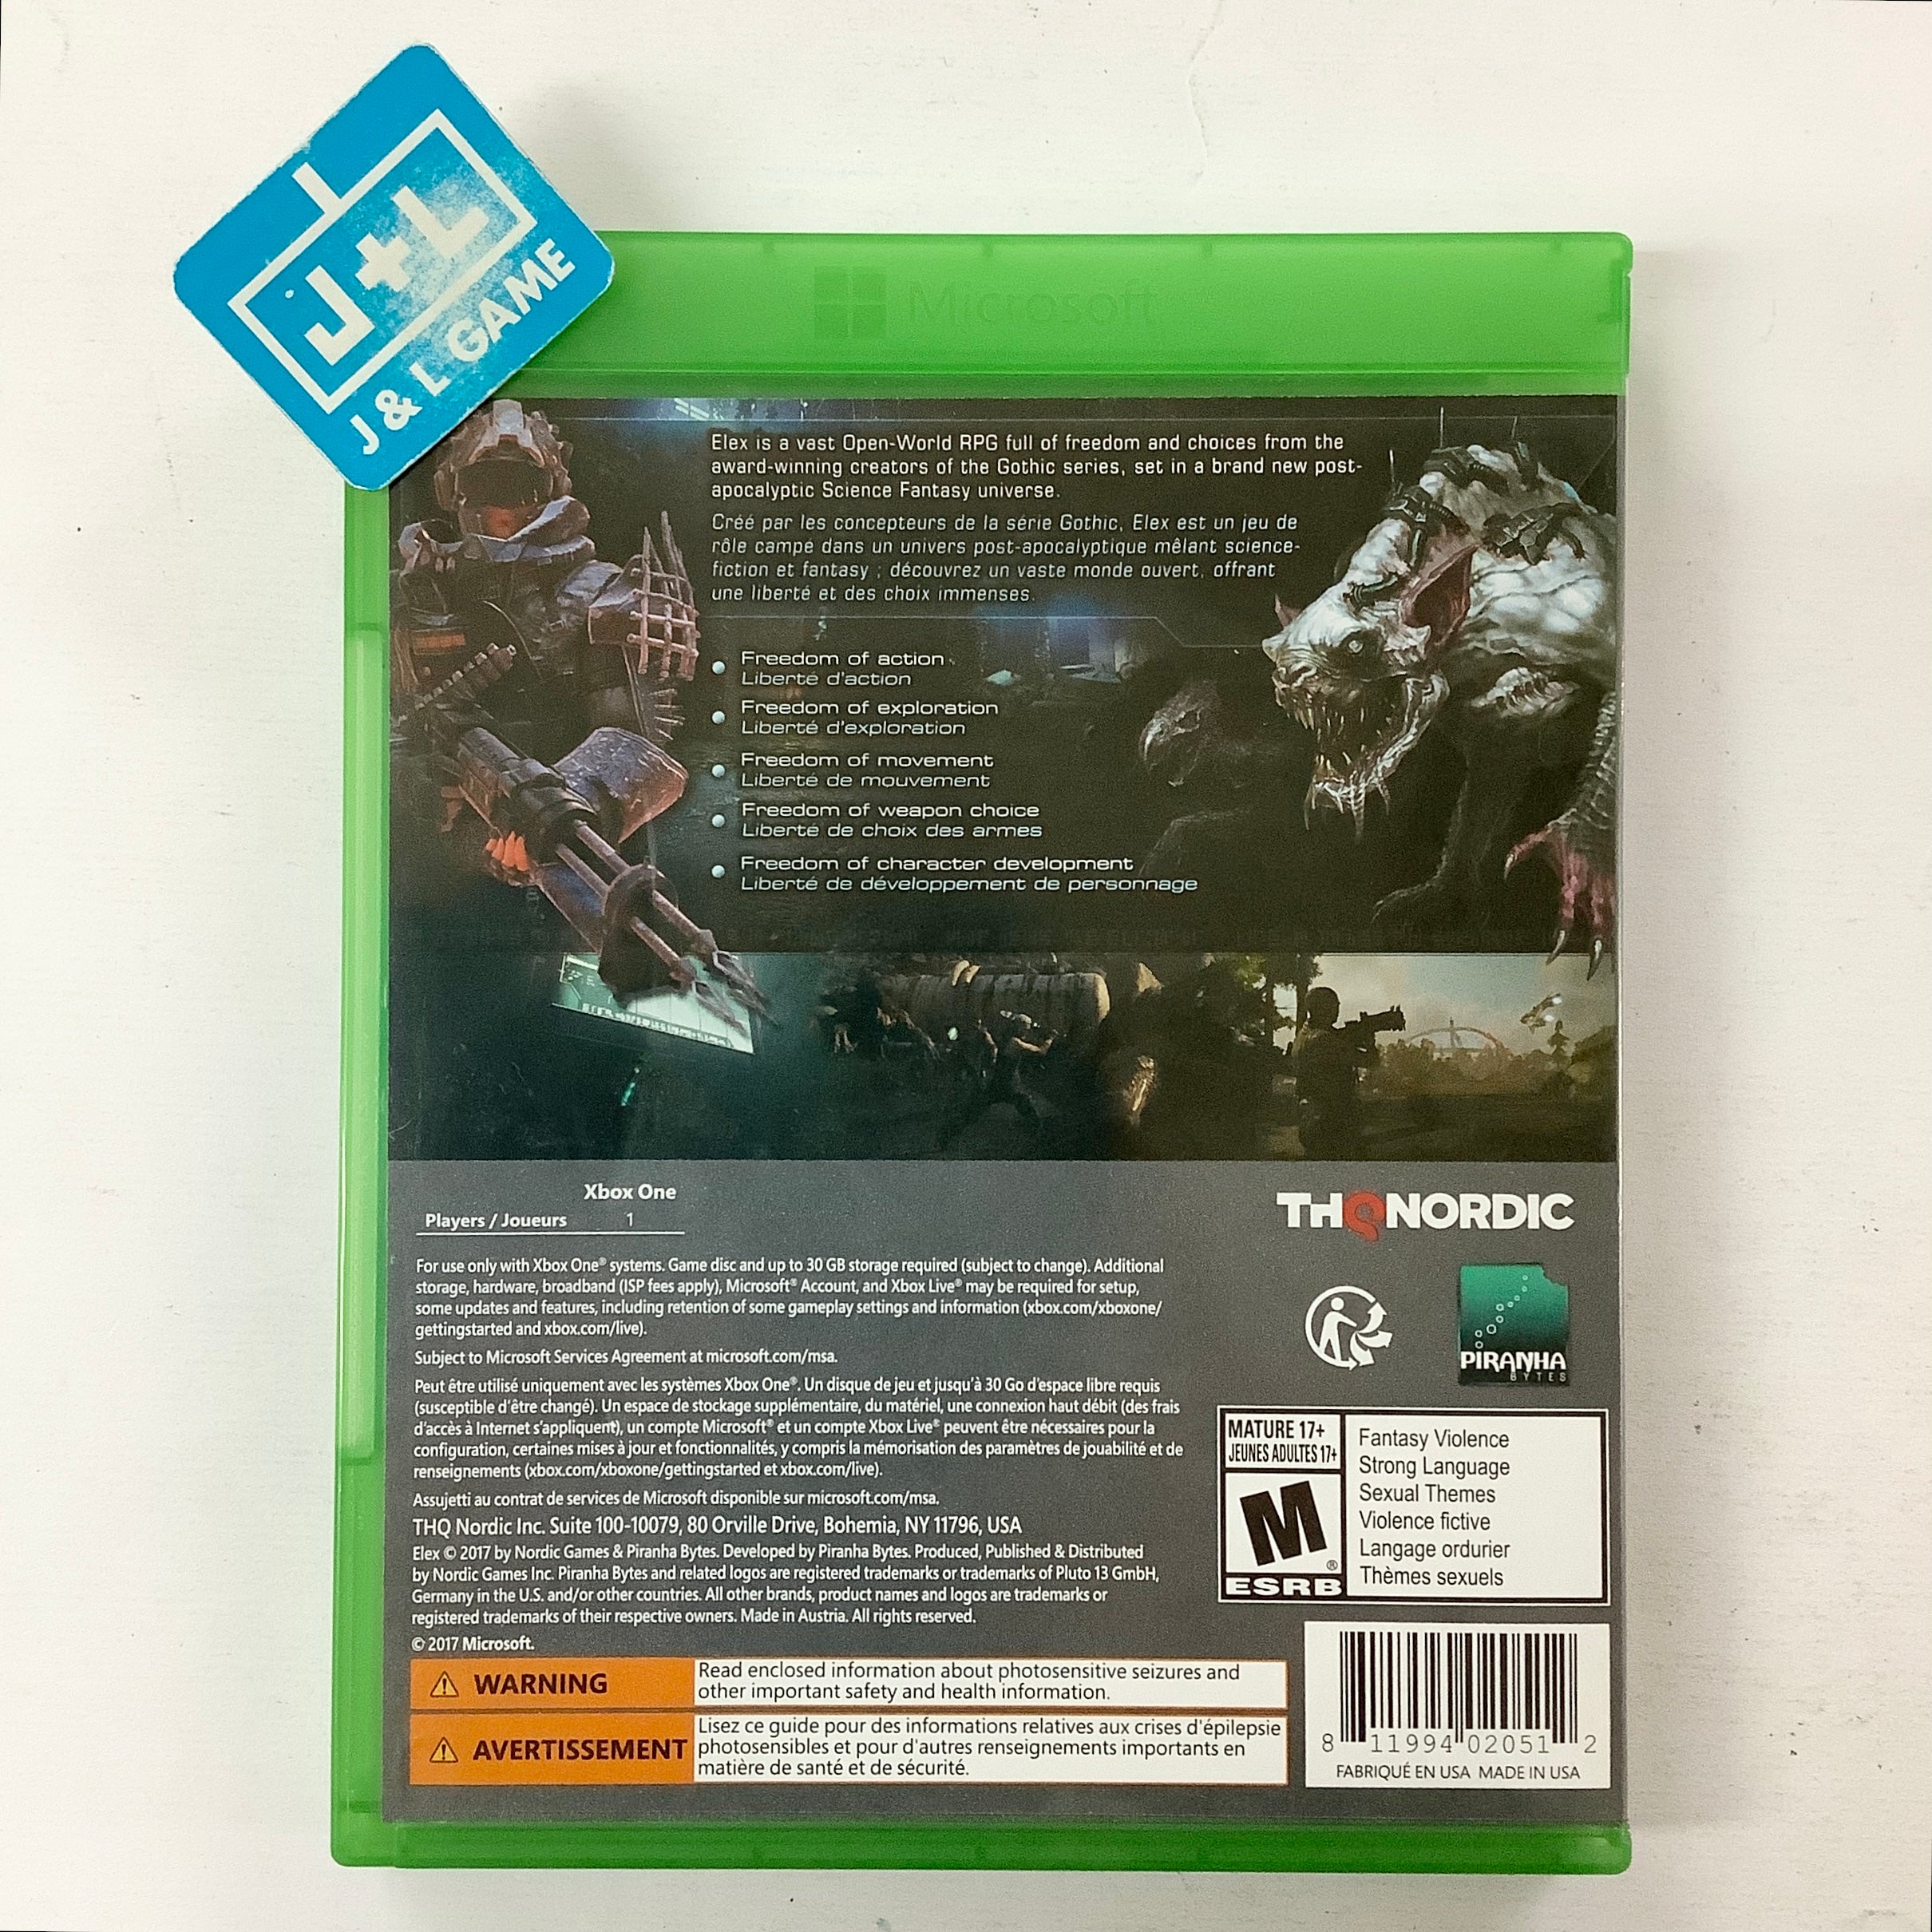 Elex - (XB1) Xbox One [Pre-Owned] Video Games THQ Nordic   